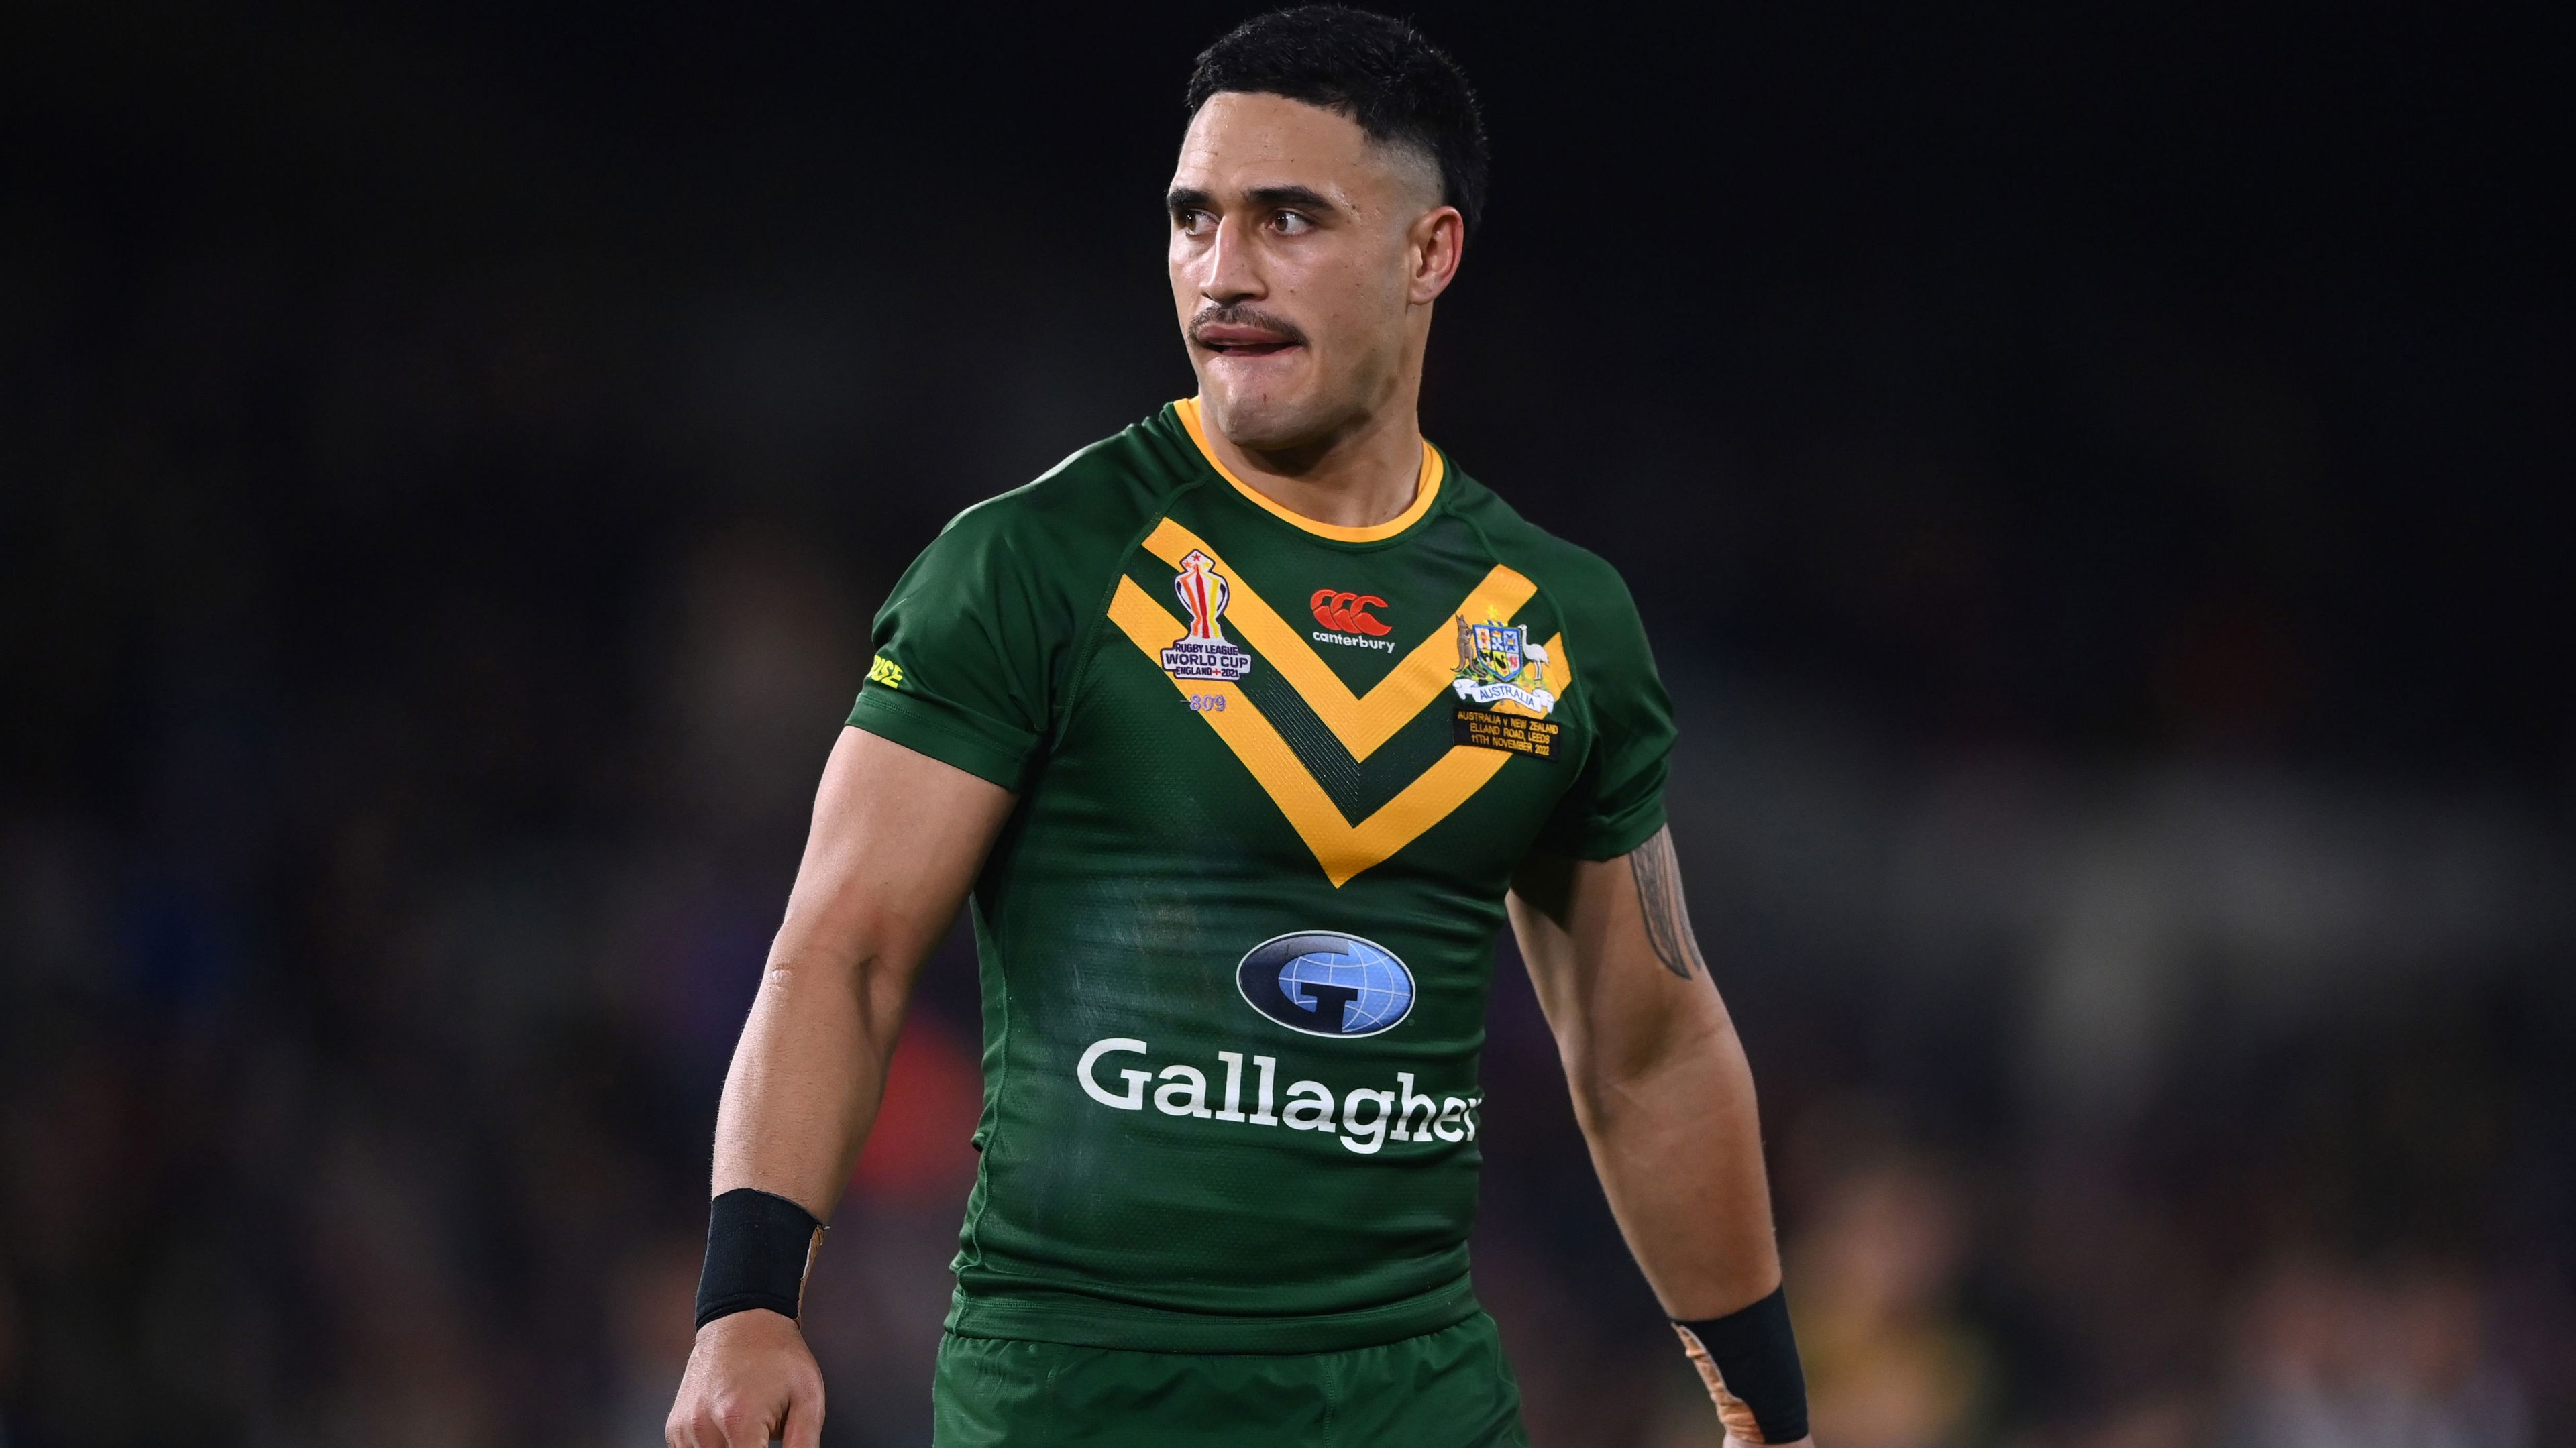 Kangaroos star Valentine Holmes during the Rugby League World Cup semi-final match between Australia and New Zealand at Elland Road on November 11, 2022 in Leeds, England. 